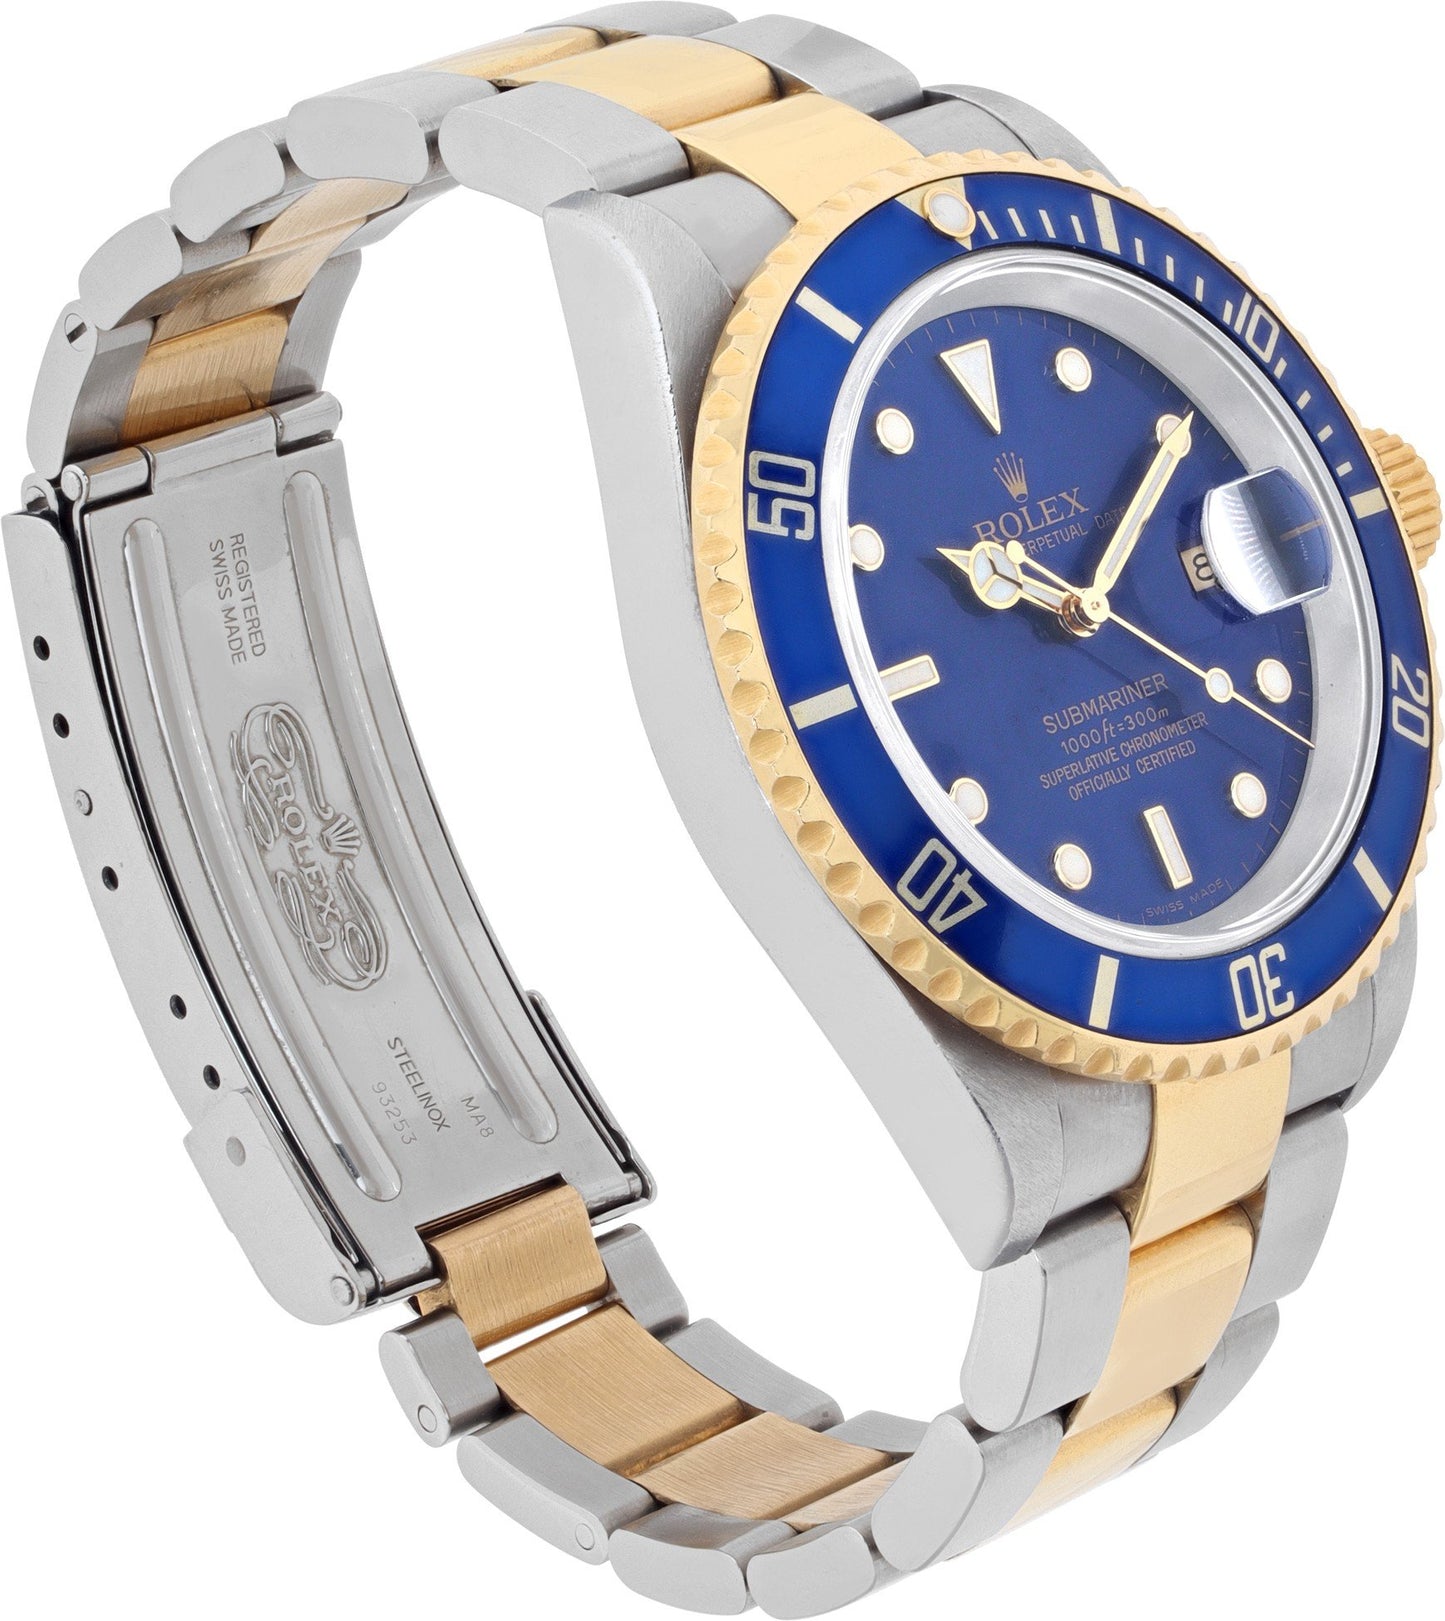 Rolex Submariner Steel and Yellow Gold Blue 16613LB